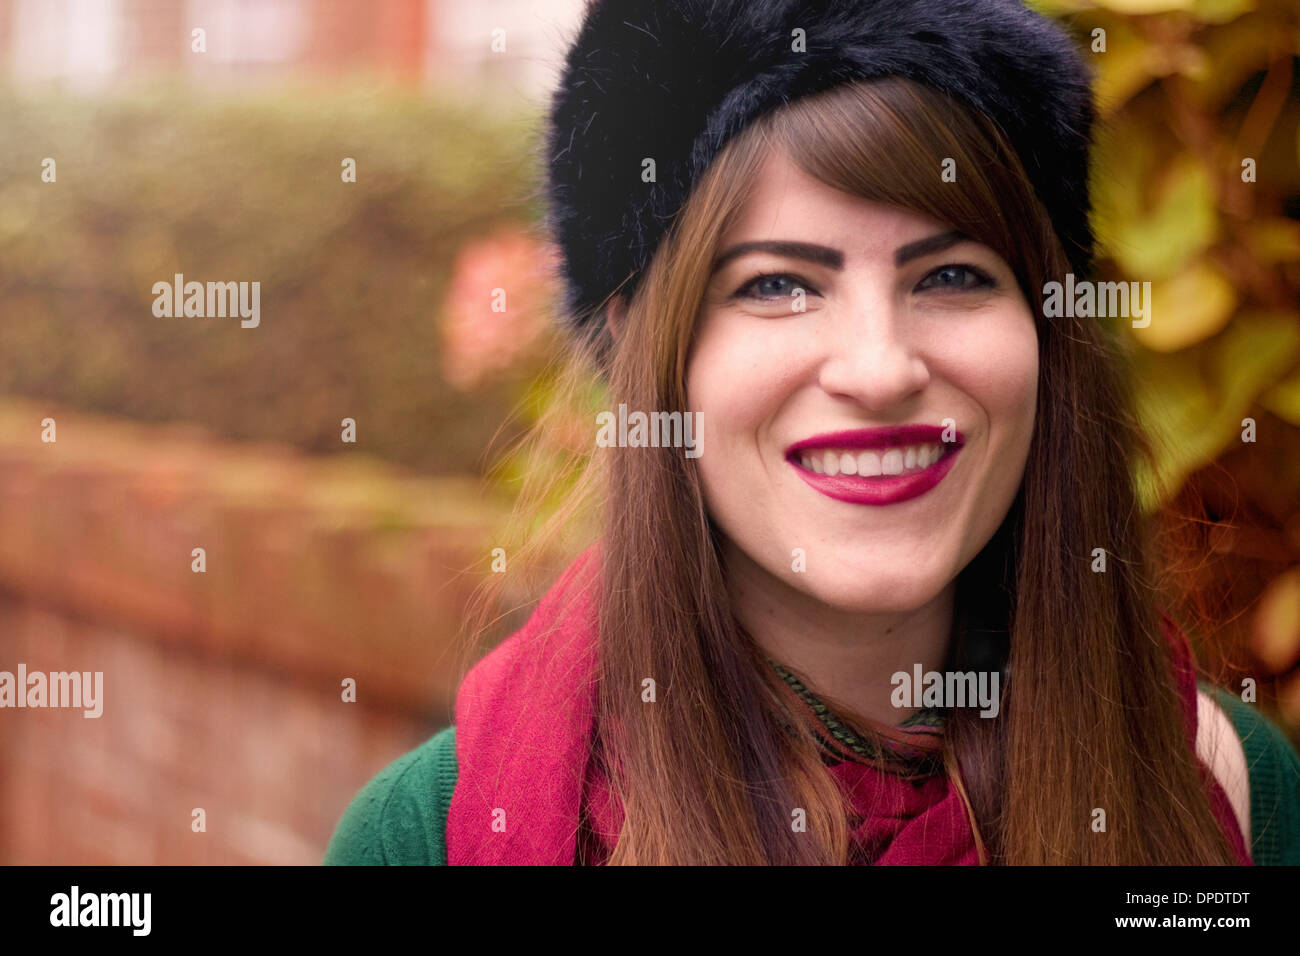 Portrait of young woman wearing winter clothing Stock Photo